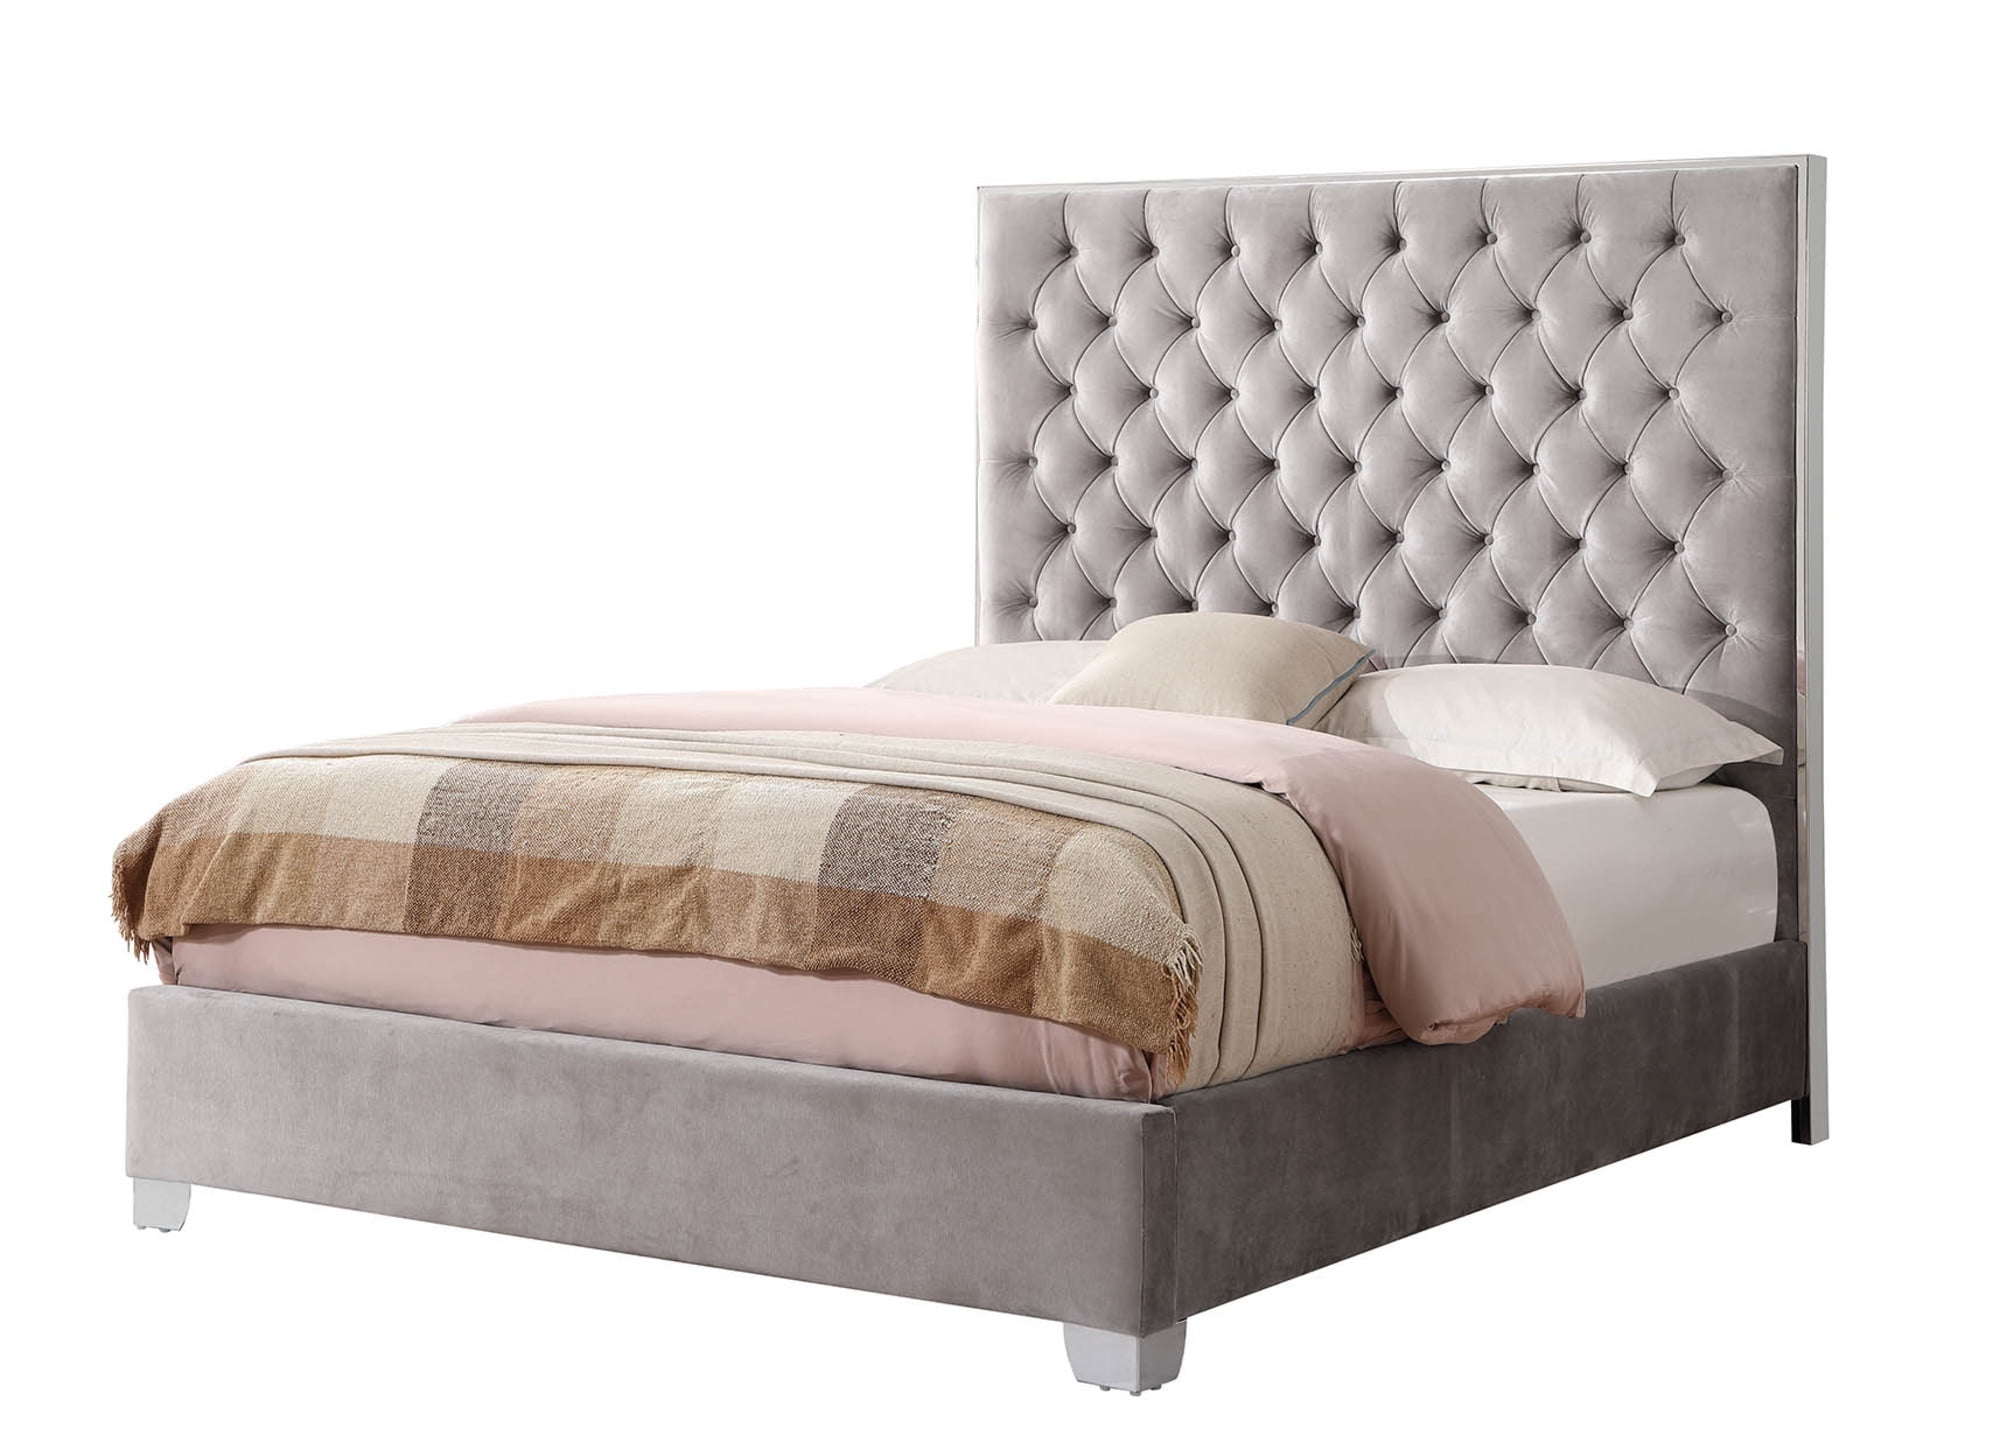 Wallace Bay James Silver Gray On, Full Size Tufted Bed Frame